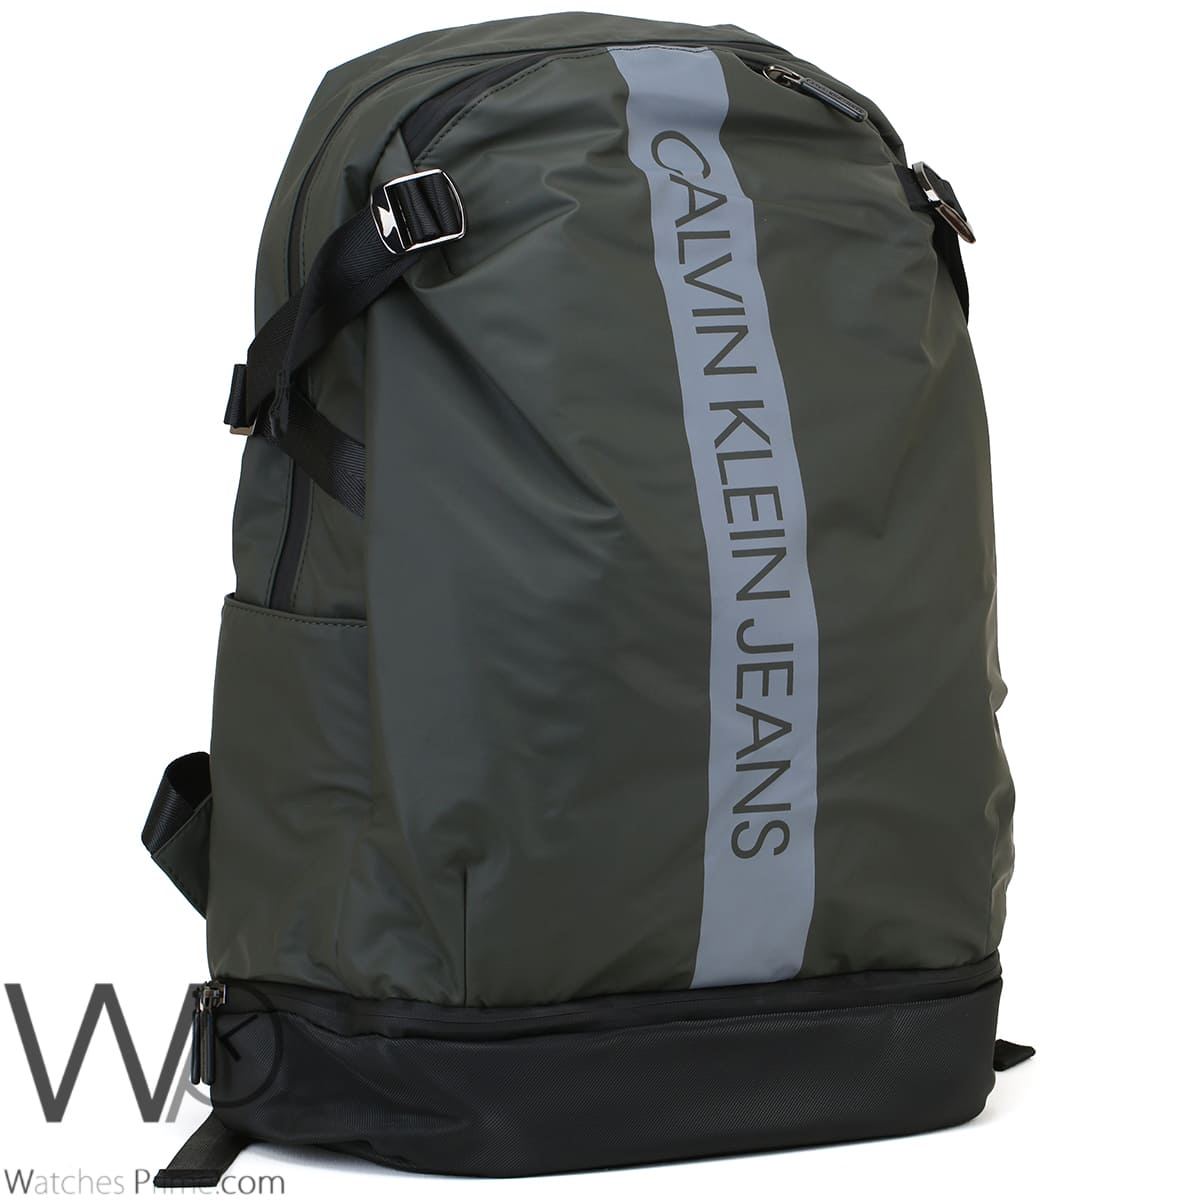 Calvin Klein Jeans Backpack Green Oily Bag | Watches Prime